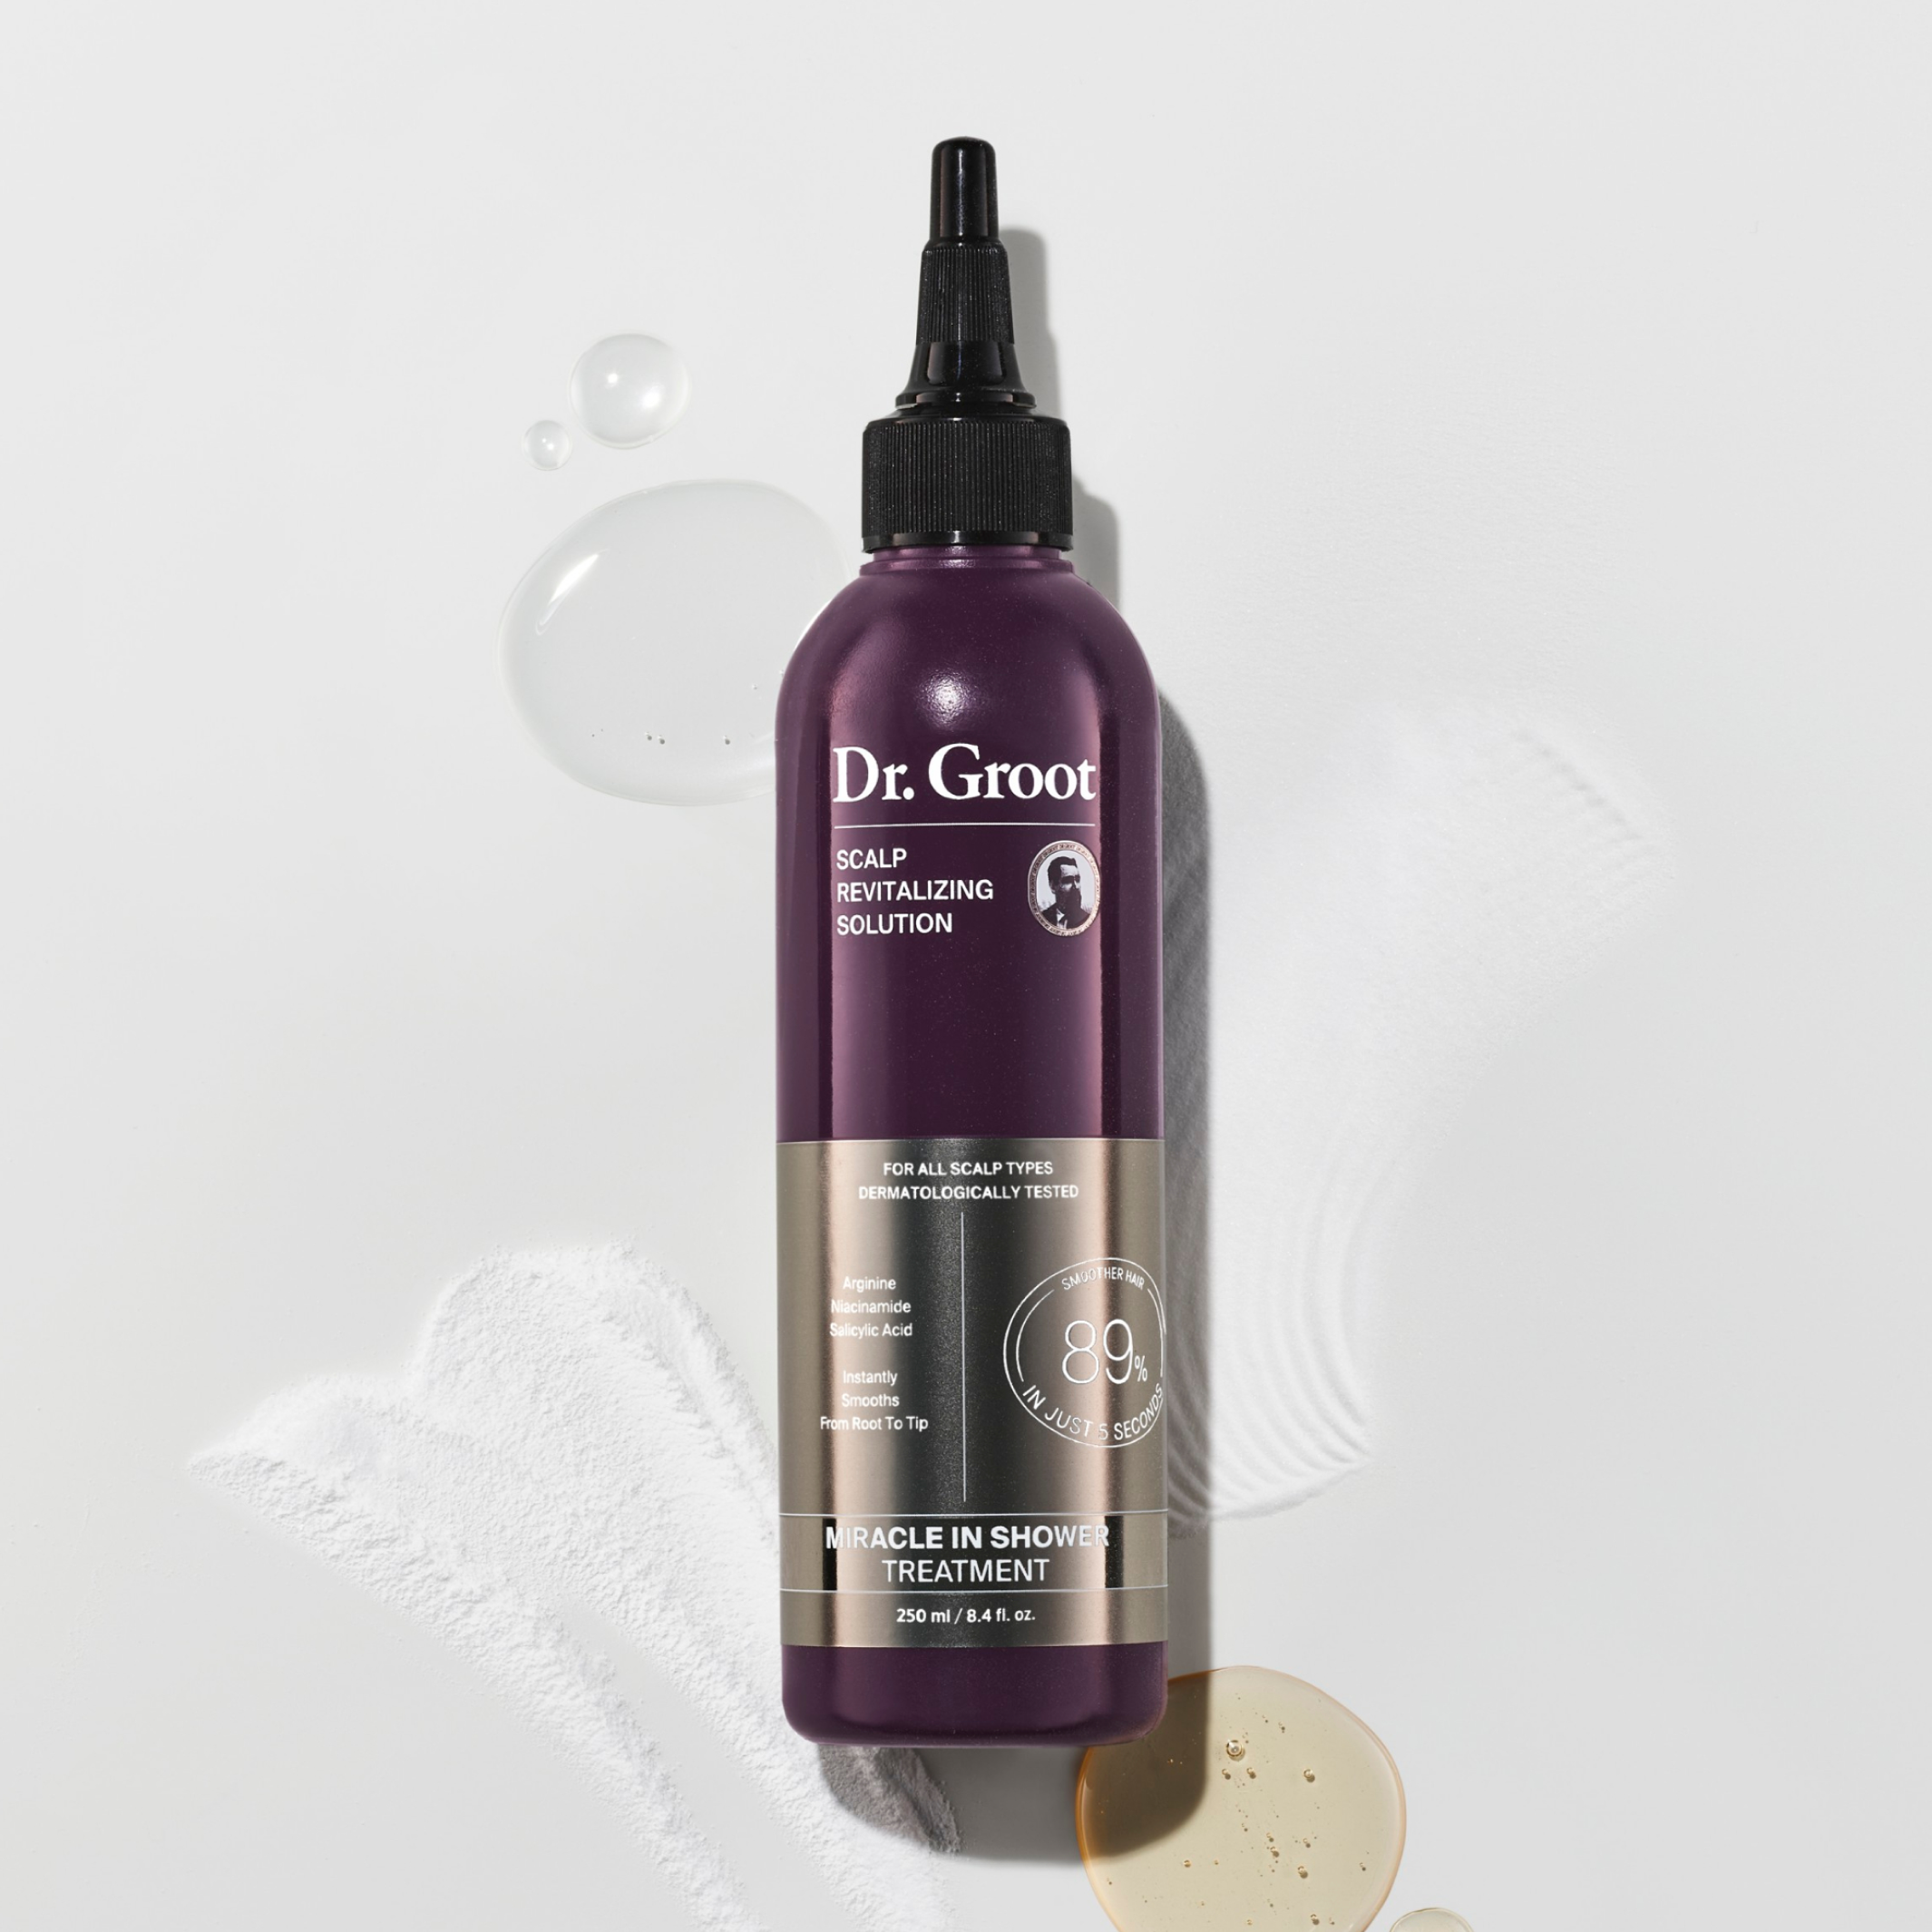 A dark purple bottle of Dr. Groot Miracle In Shower Treatment lying on a grey surface in a few drops of the tonic and two spreads of white powder.